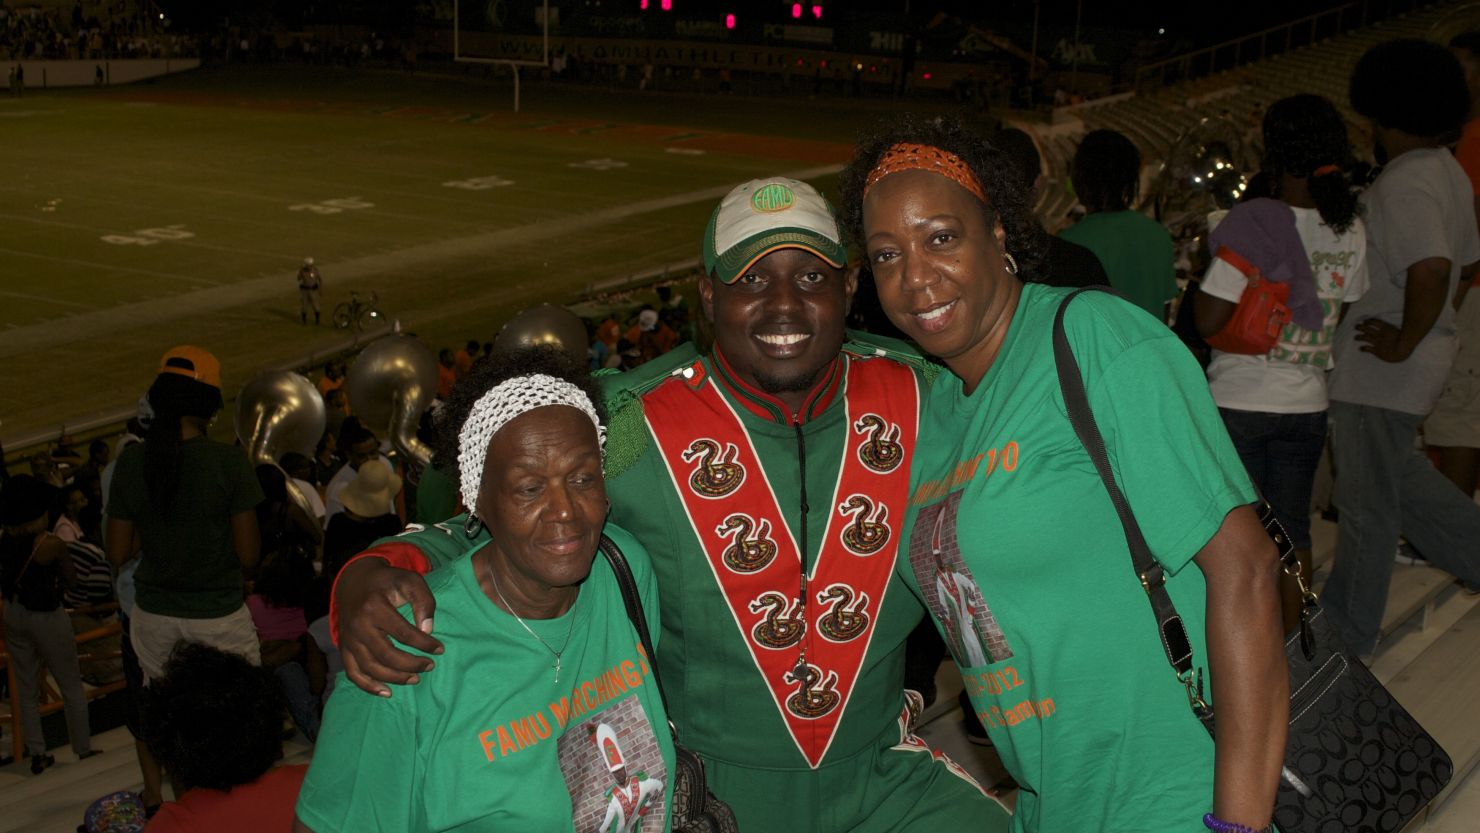 Florida A&M drum major Robert Champion died during a 2011 hazing incident. Champion's family is suing the university.